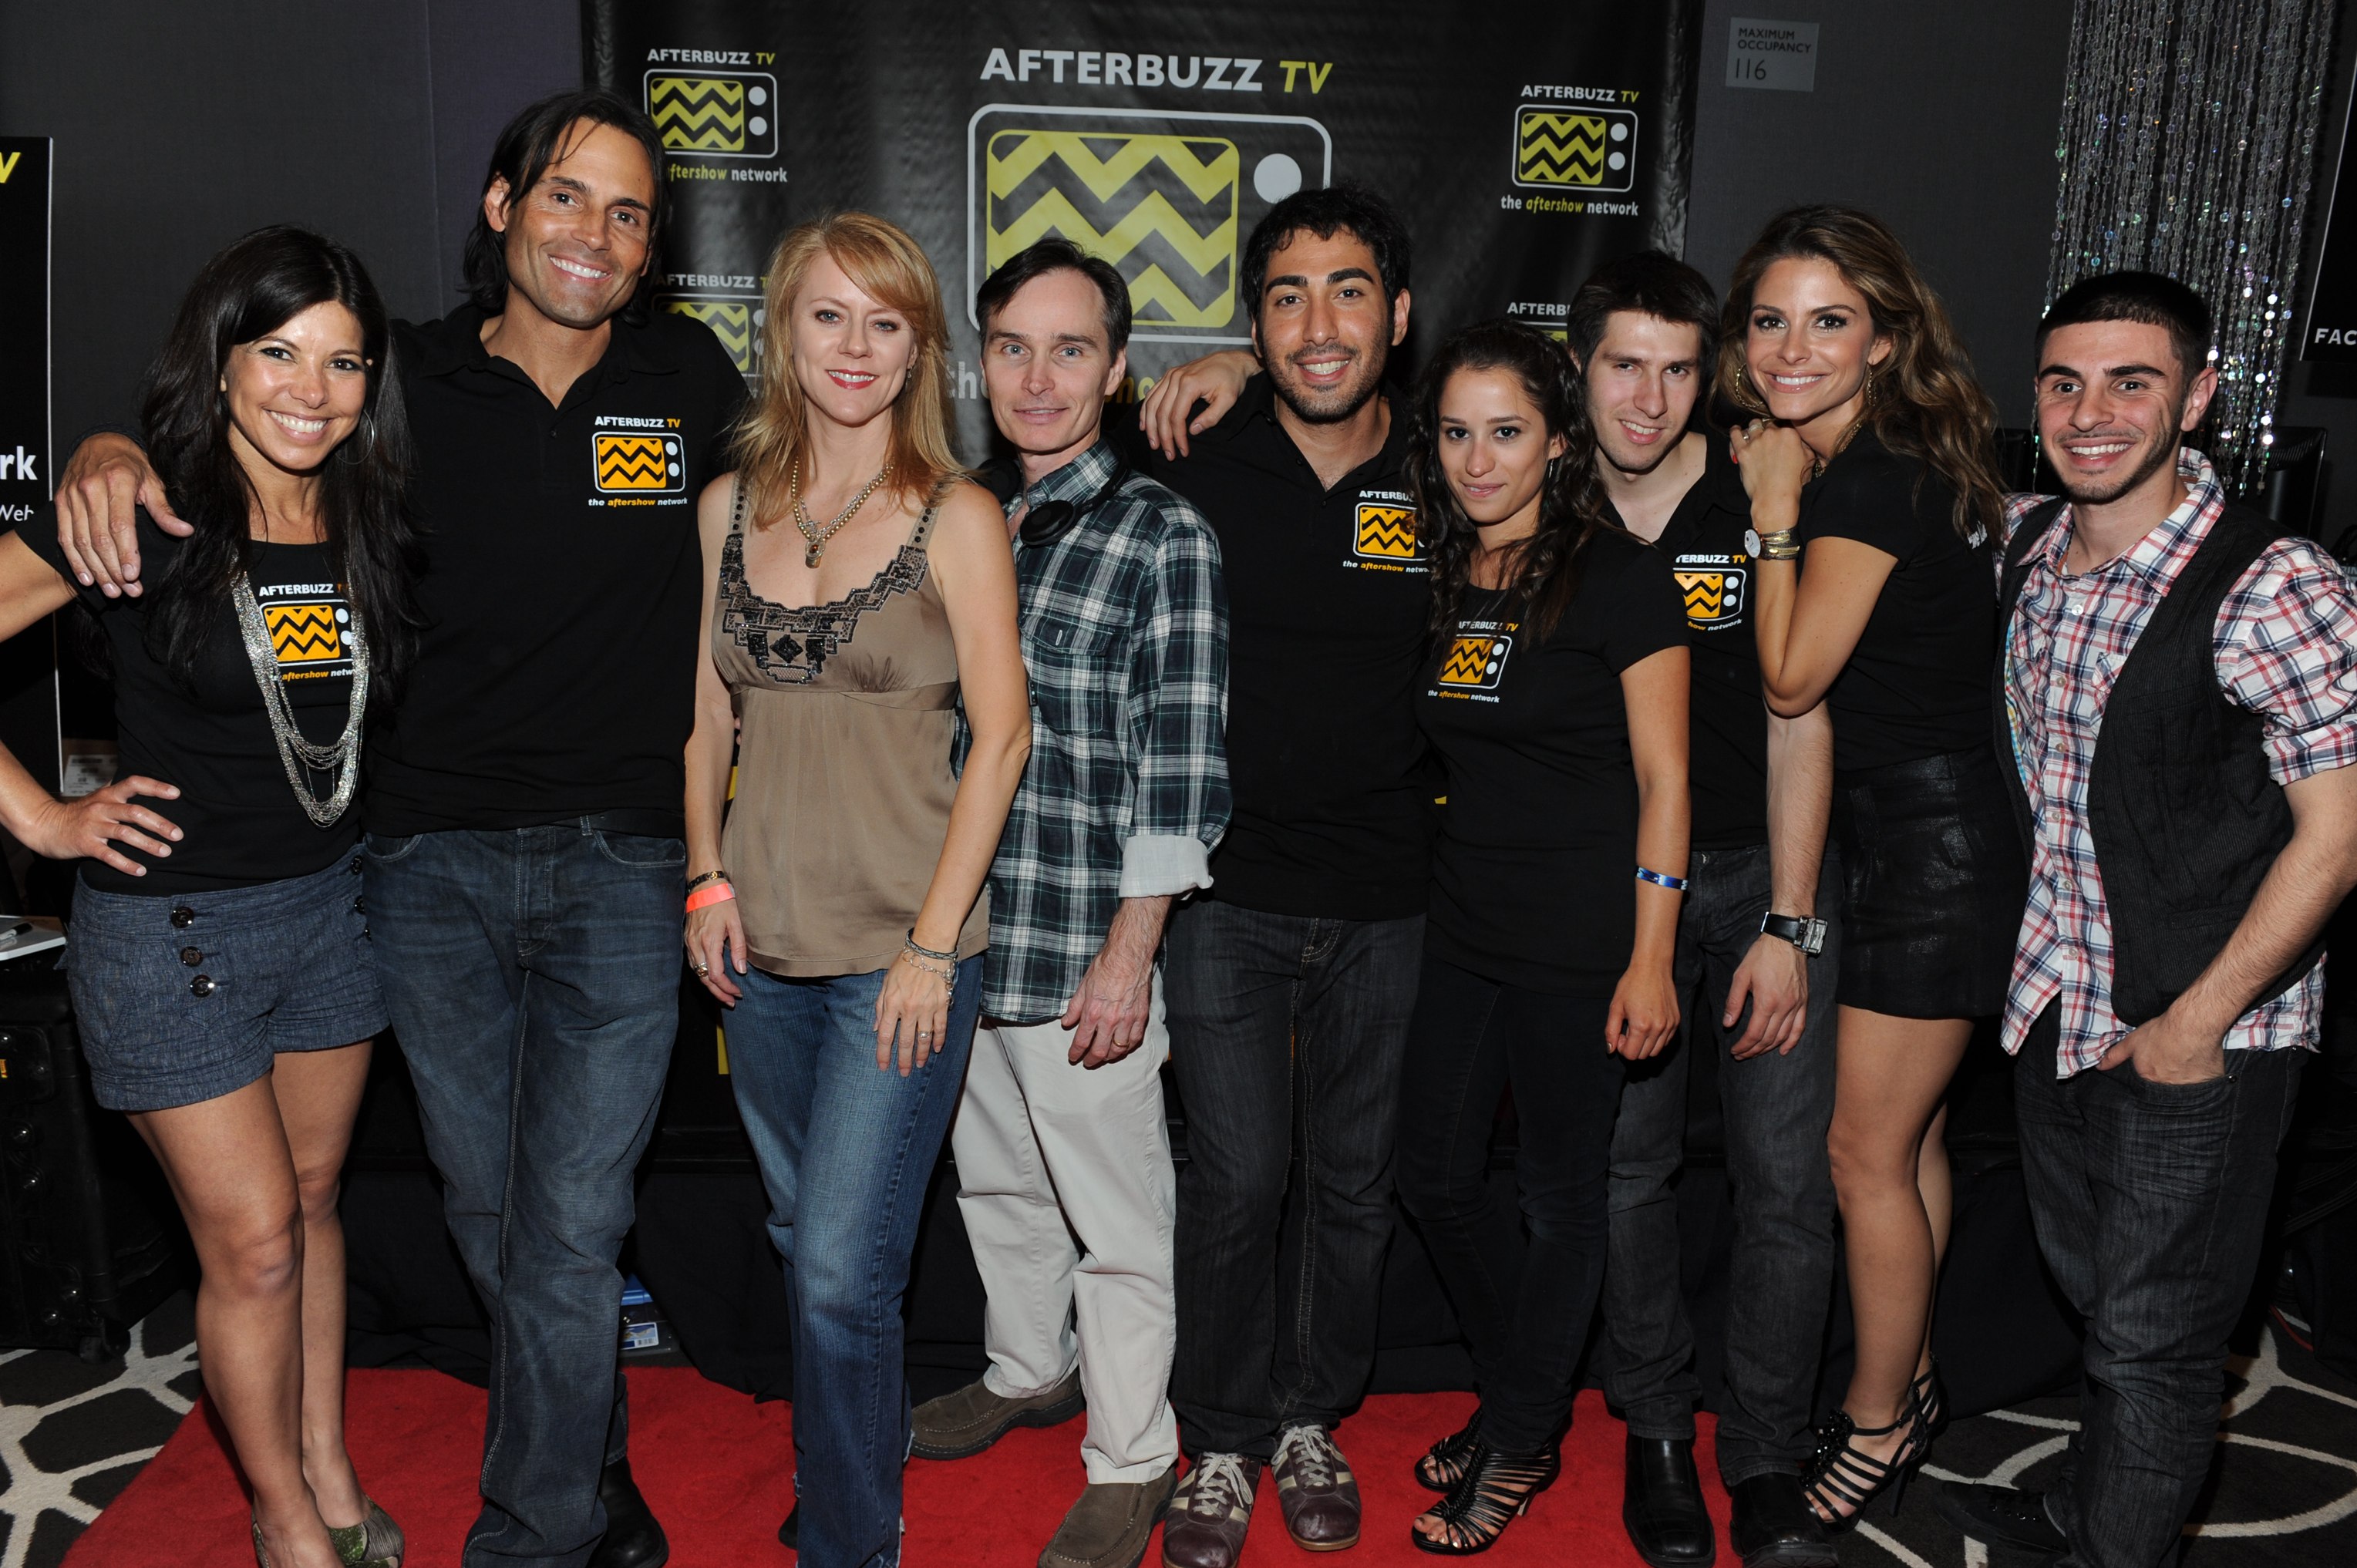 AfterbuzzTV MTV Style Lounge Hosts; and co-founder Maria Menounos